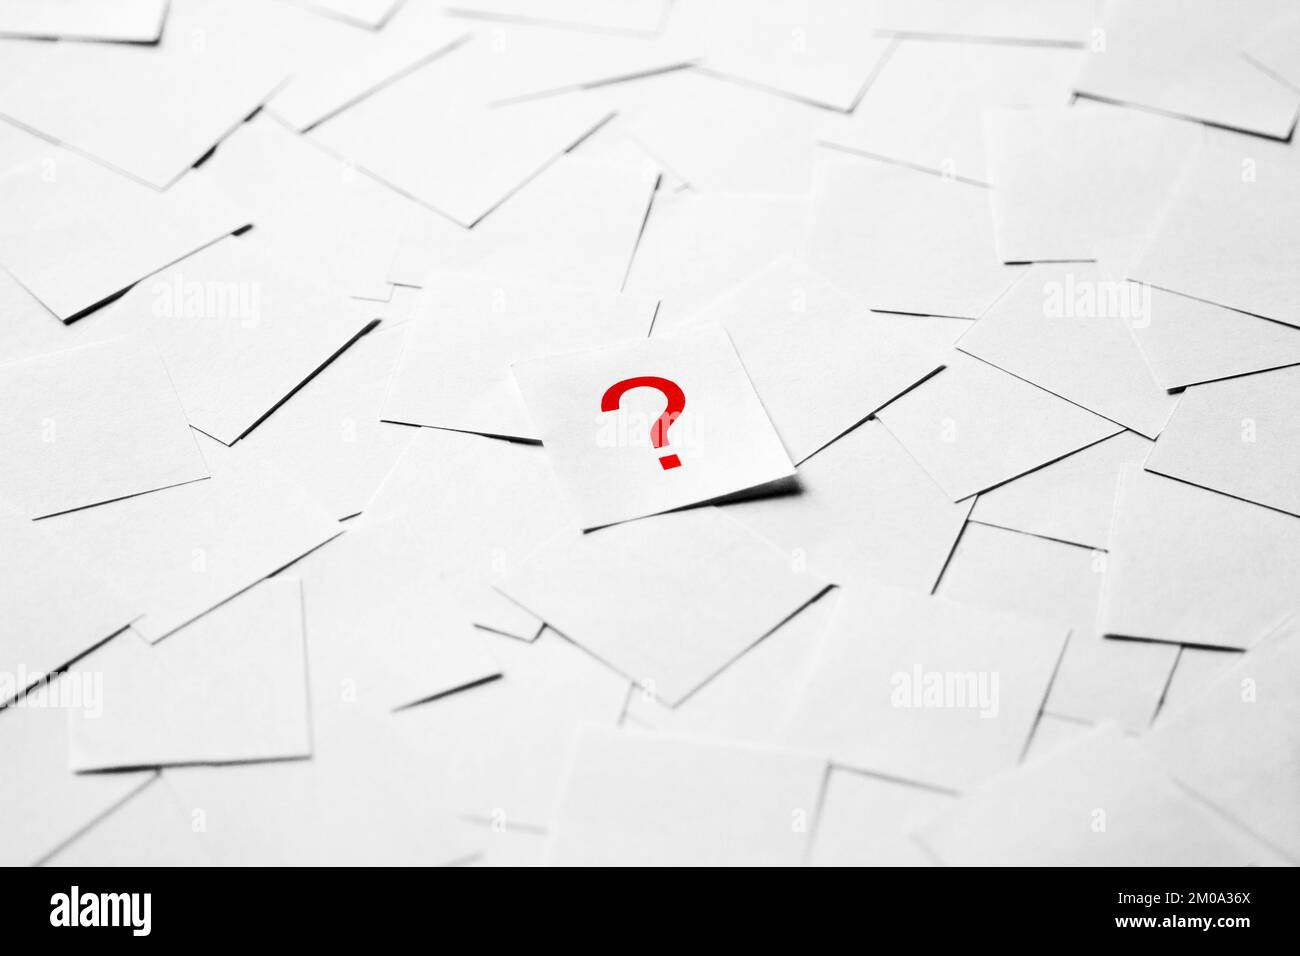 Pile of blank pieces of paper with red question mark in the middle Stock Photo